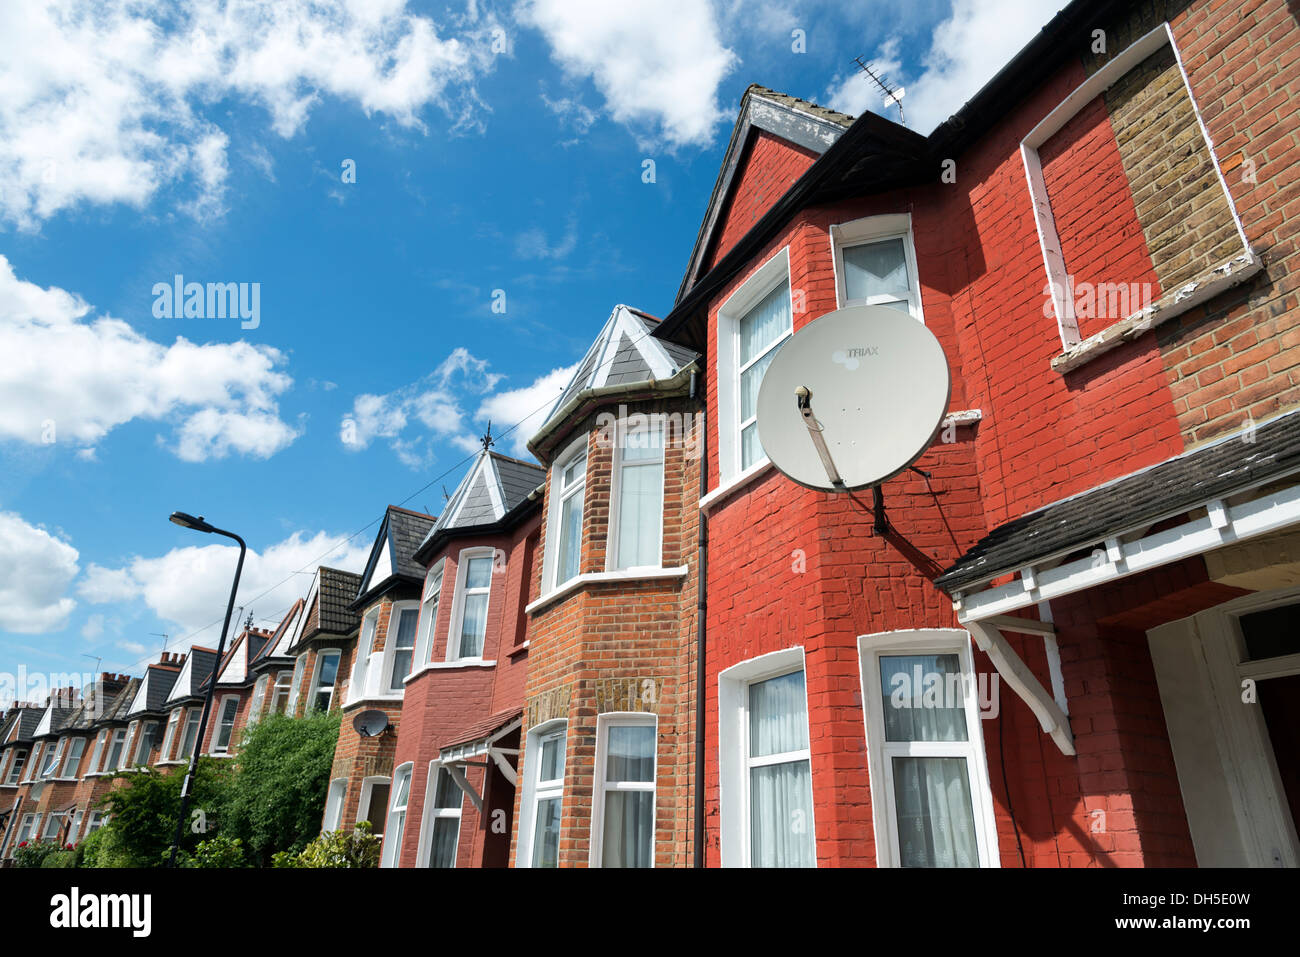 Satellite dish on a terraced house on a residential street, London, England, UK Stock Photo